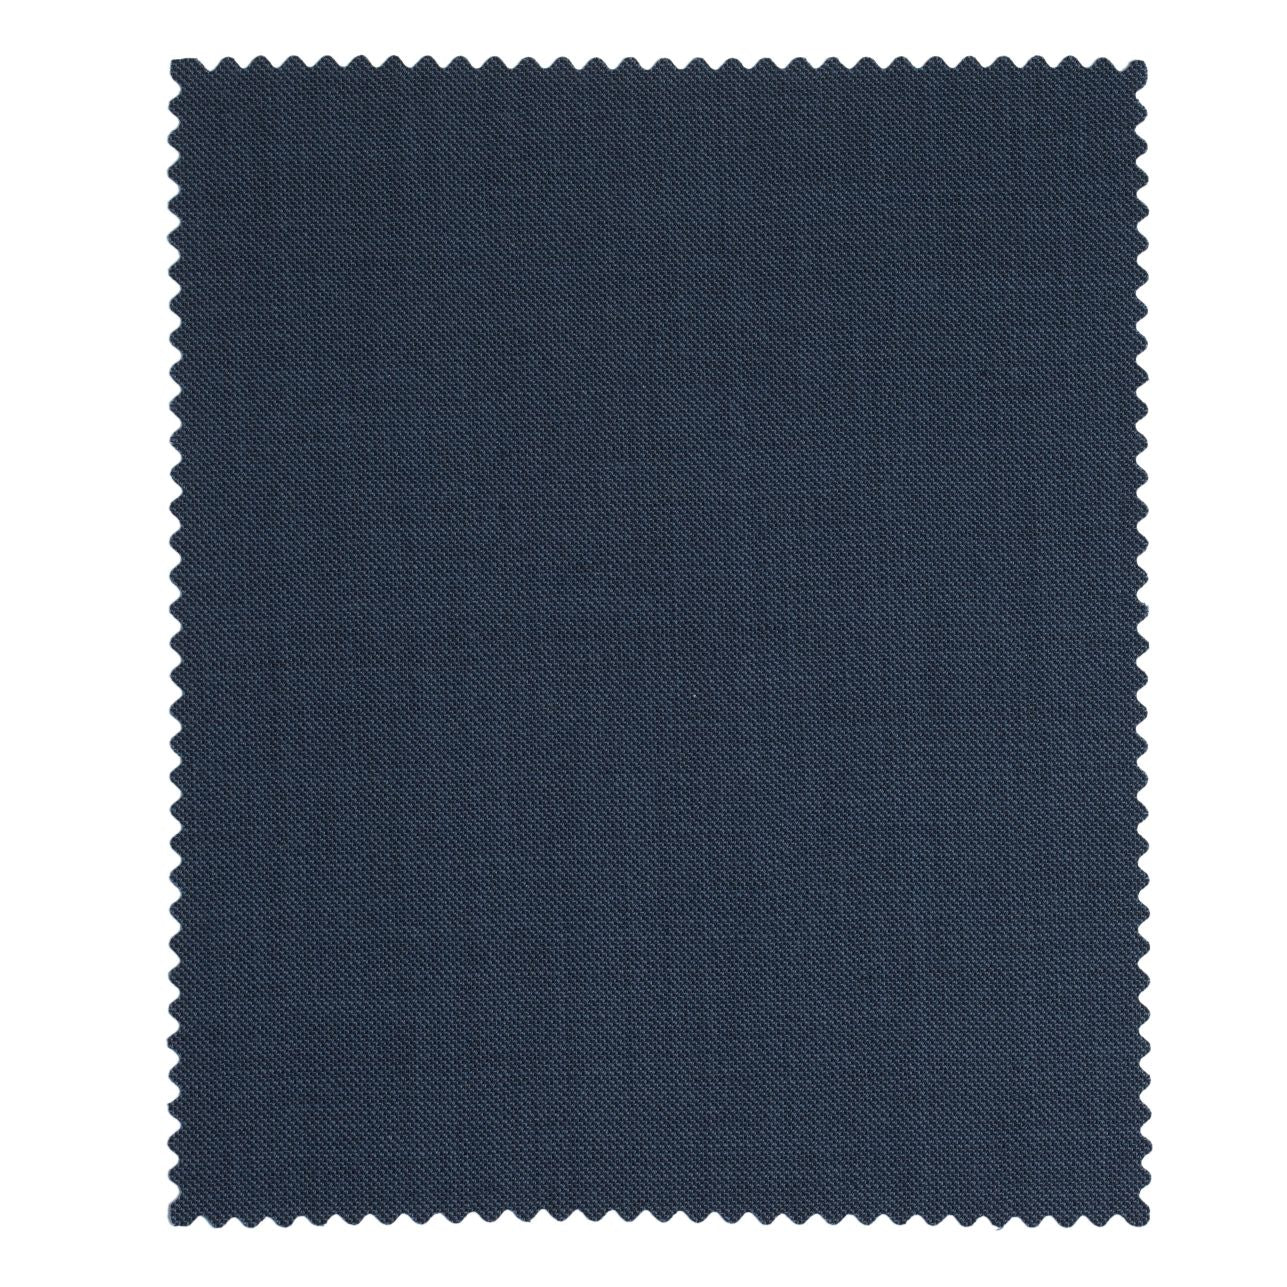 Sharkskin Super 120s Worsted Wool Comfort-EZE Trouser in New Navy (Manchester Pleated Model) by Ballin